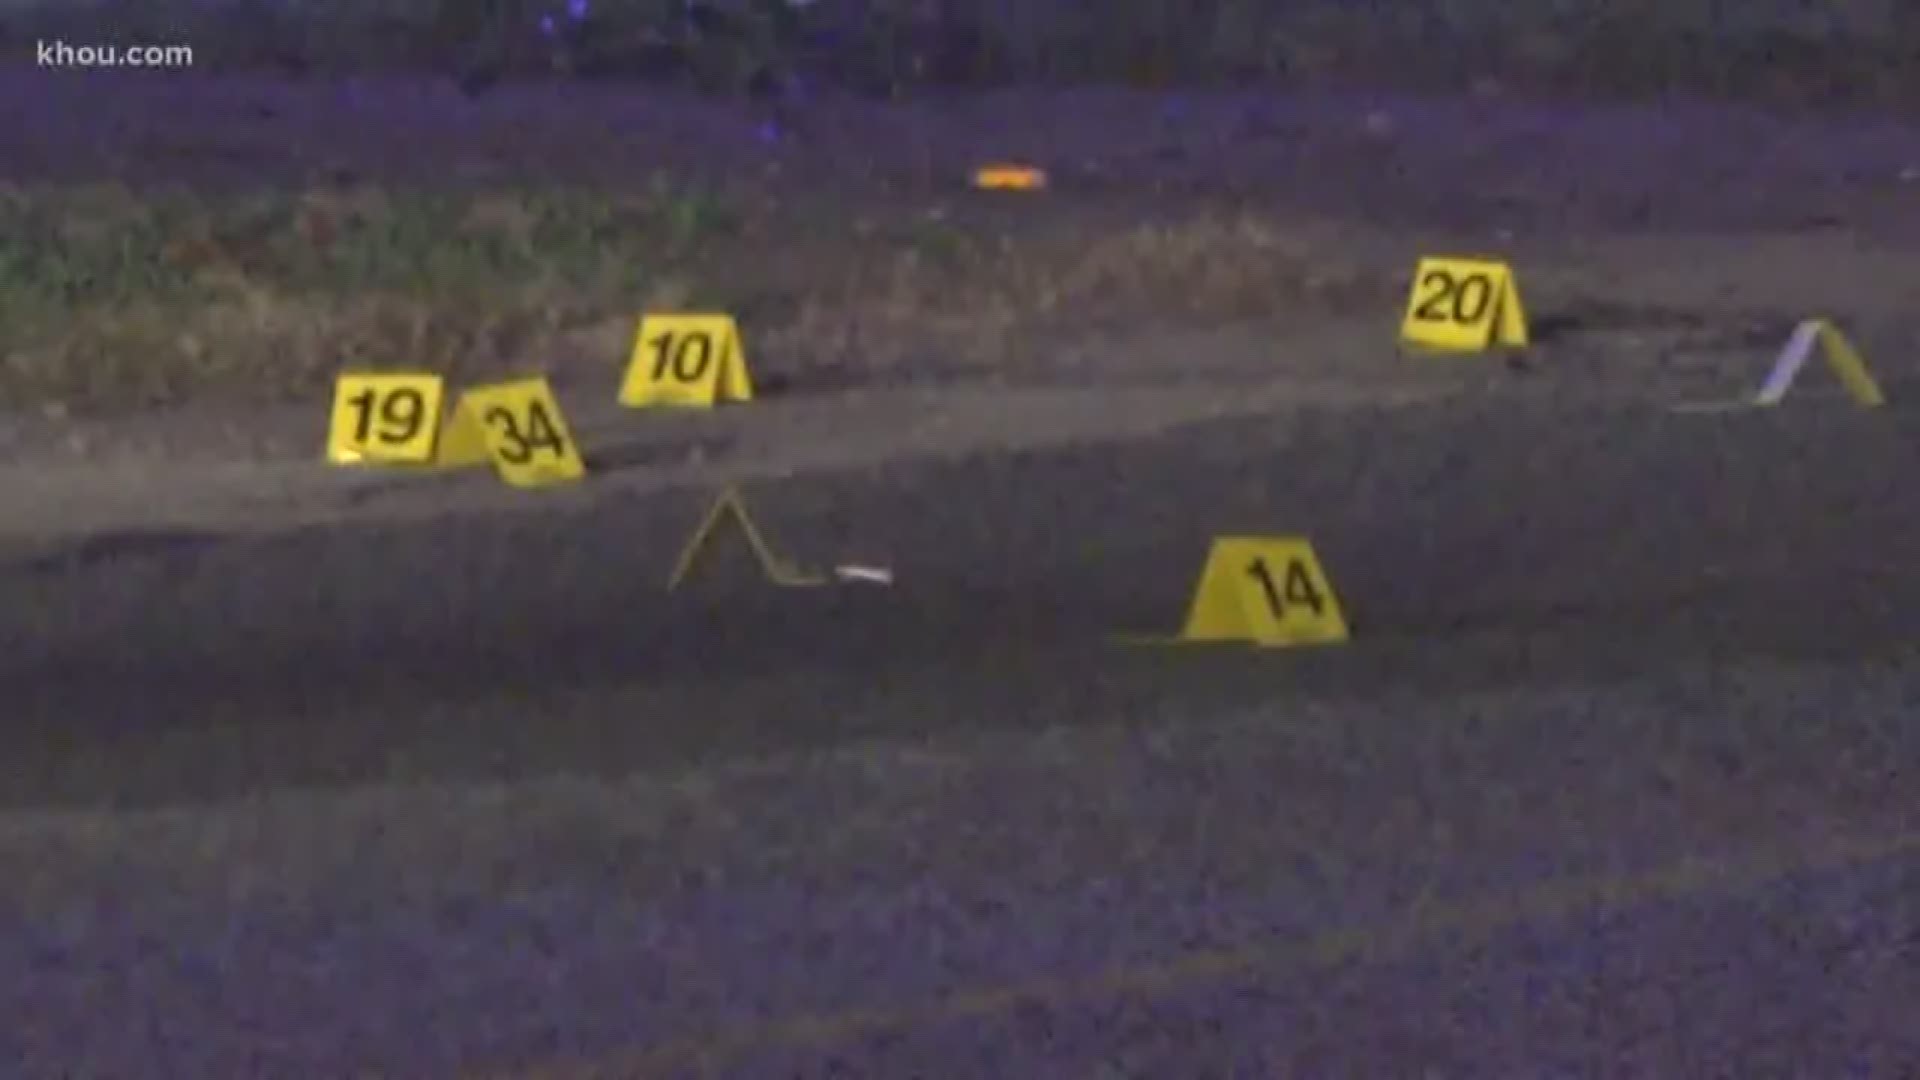 Deputies said the victims were ambushed in a drive-by shooting in north Harris County.